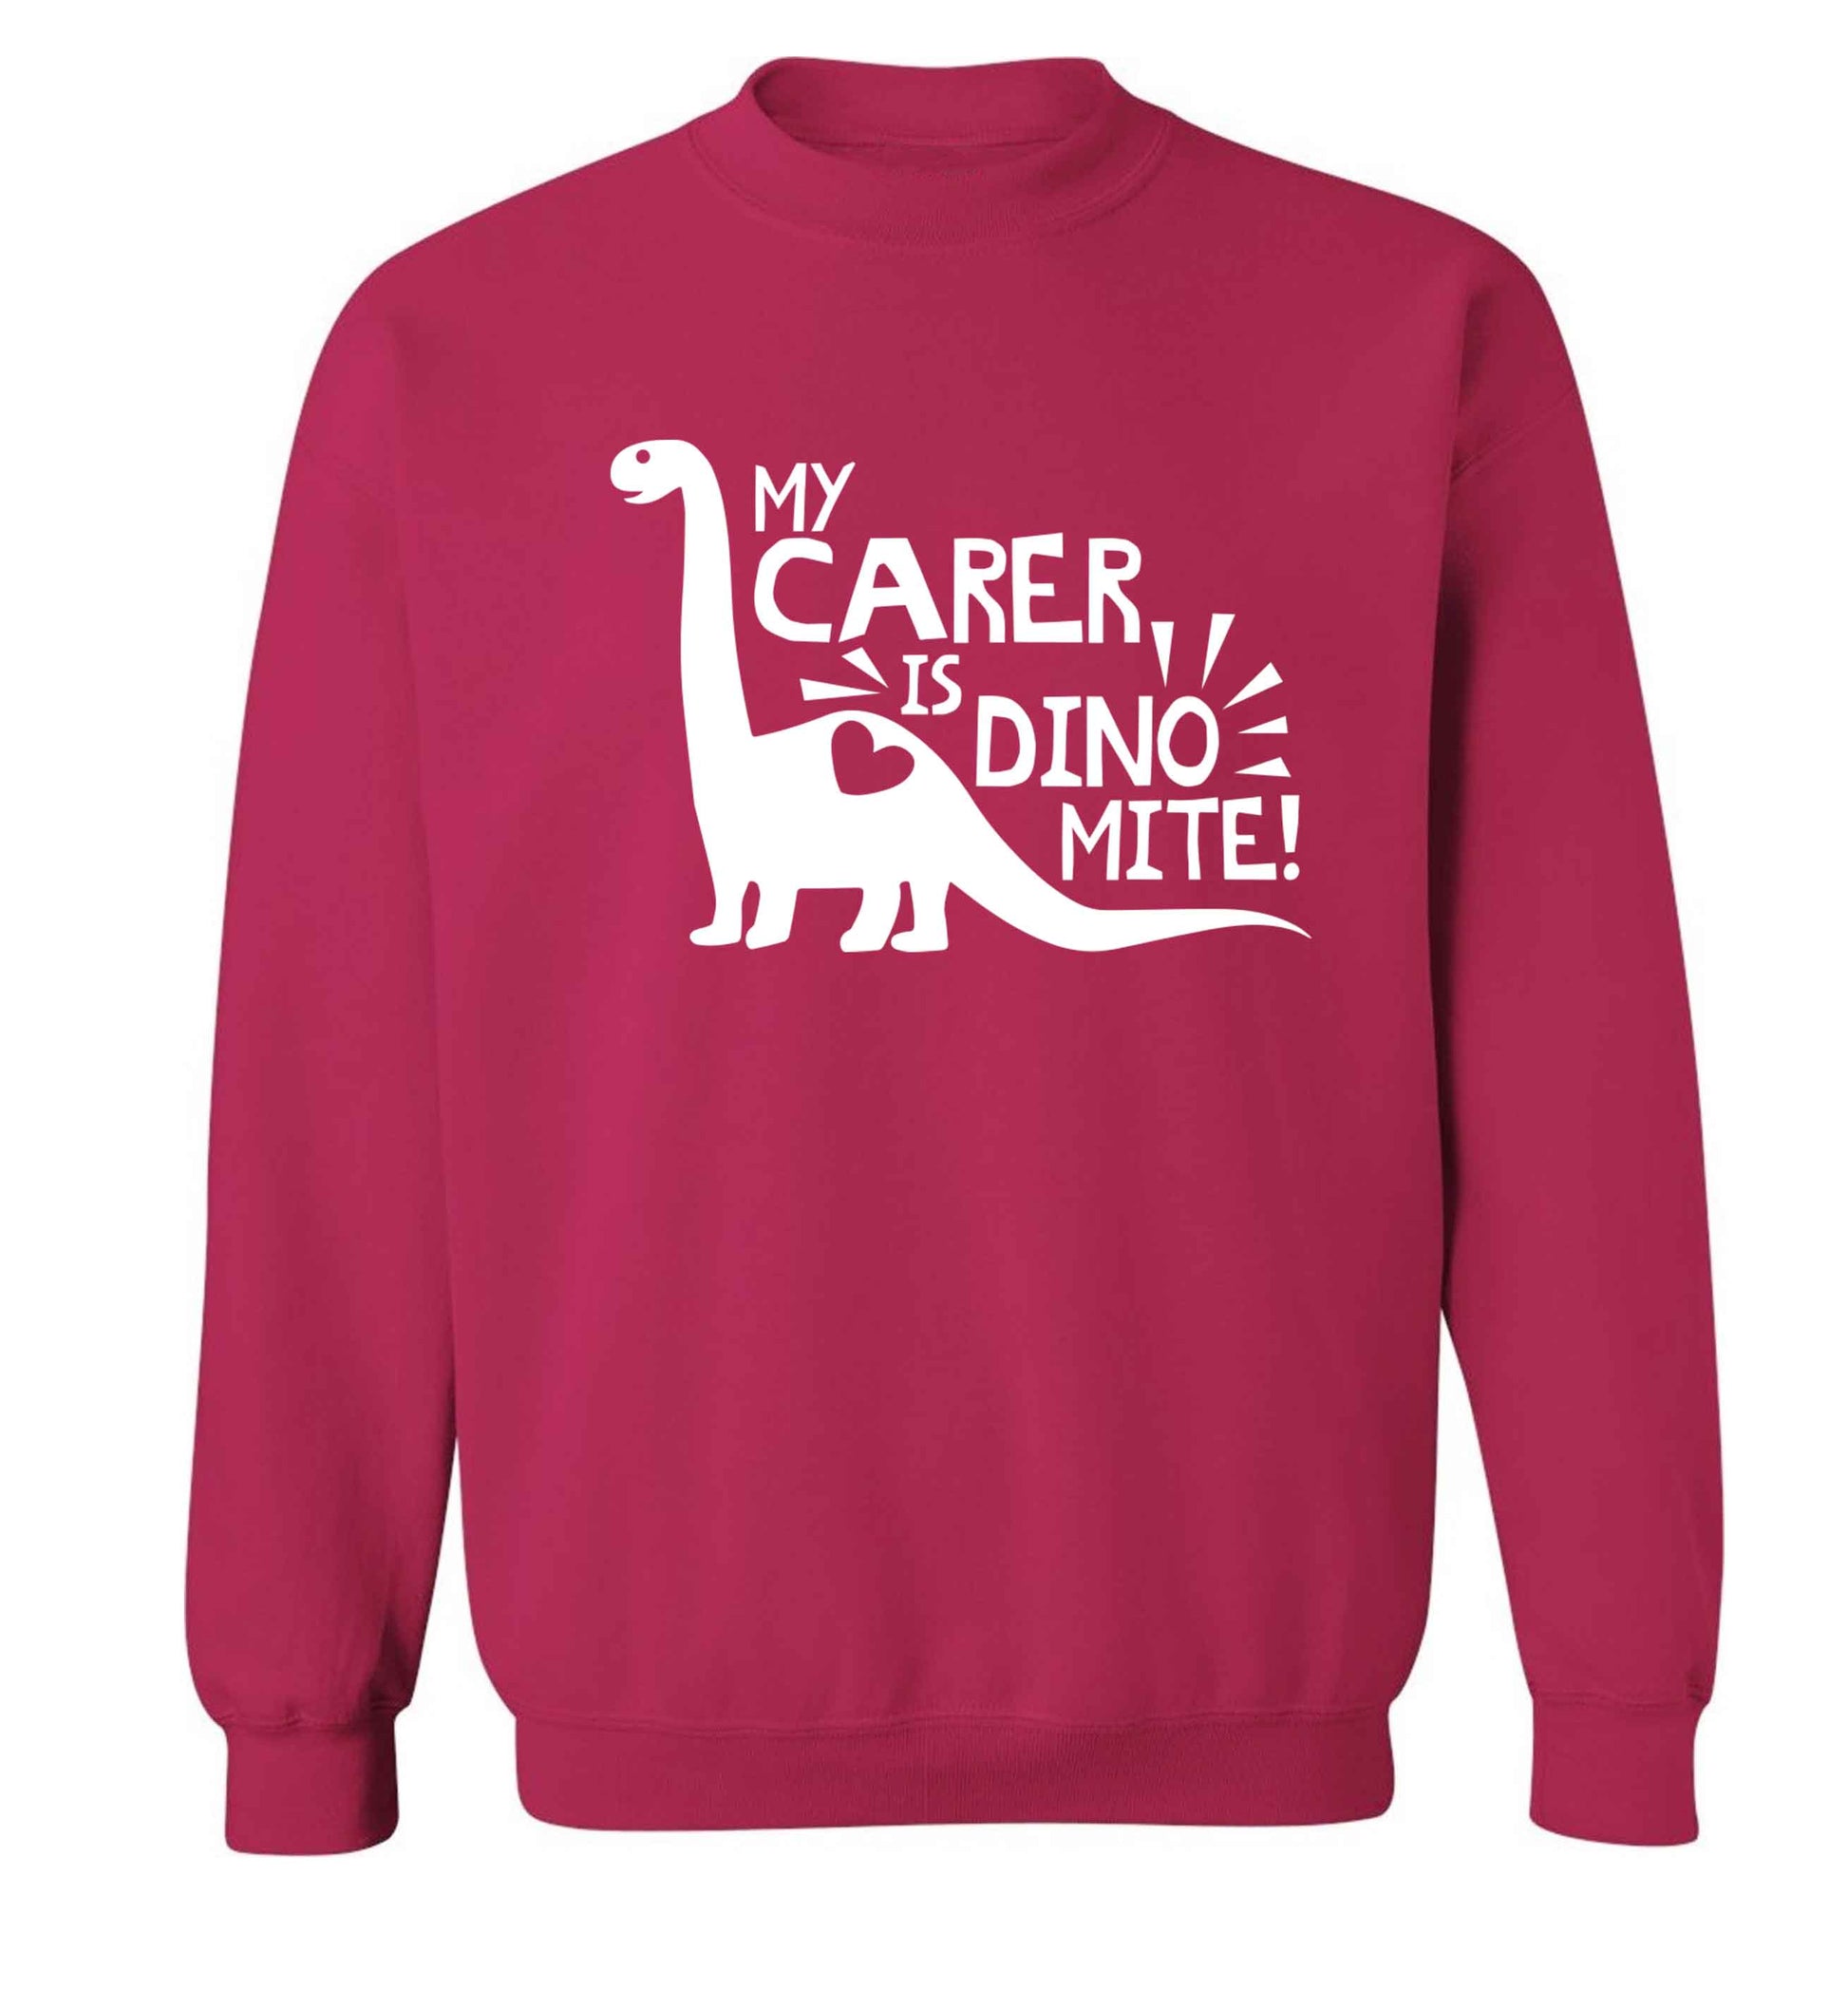 My carer is dinomite! Adult's unisex pink Sweater 2XL